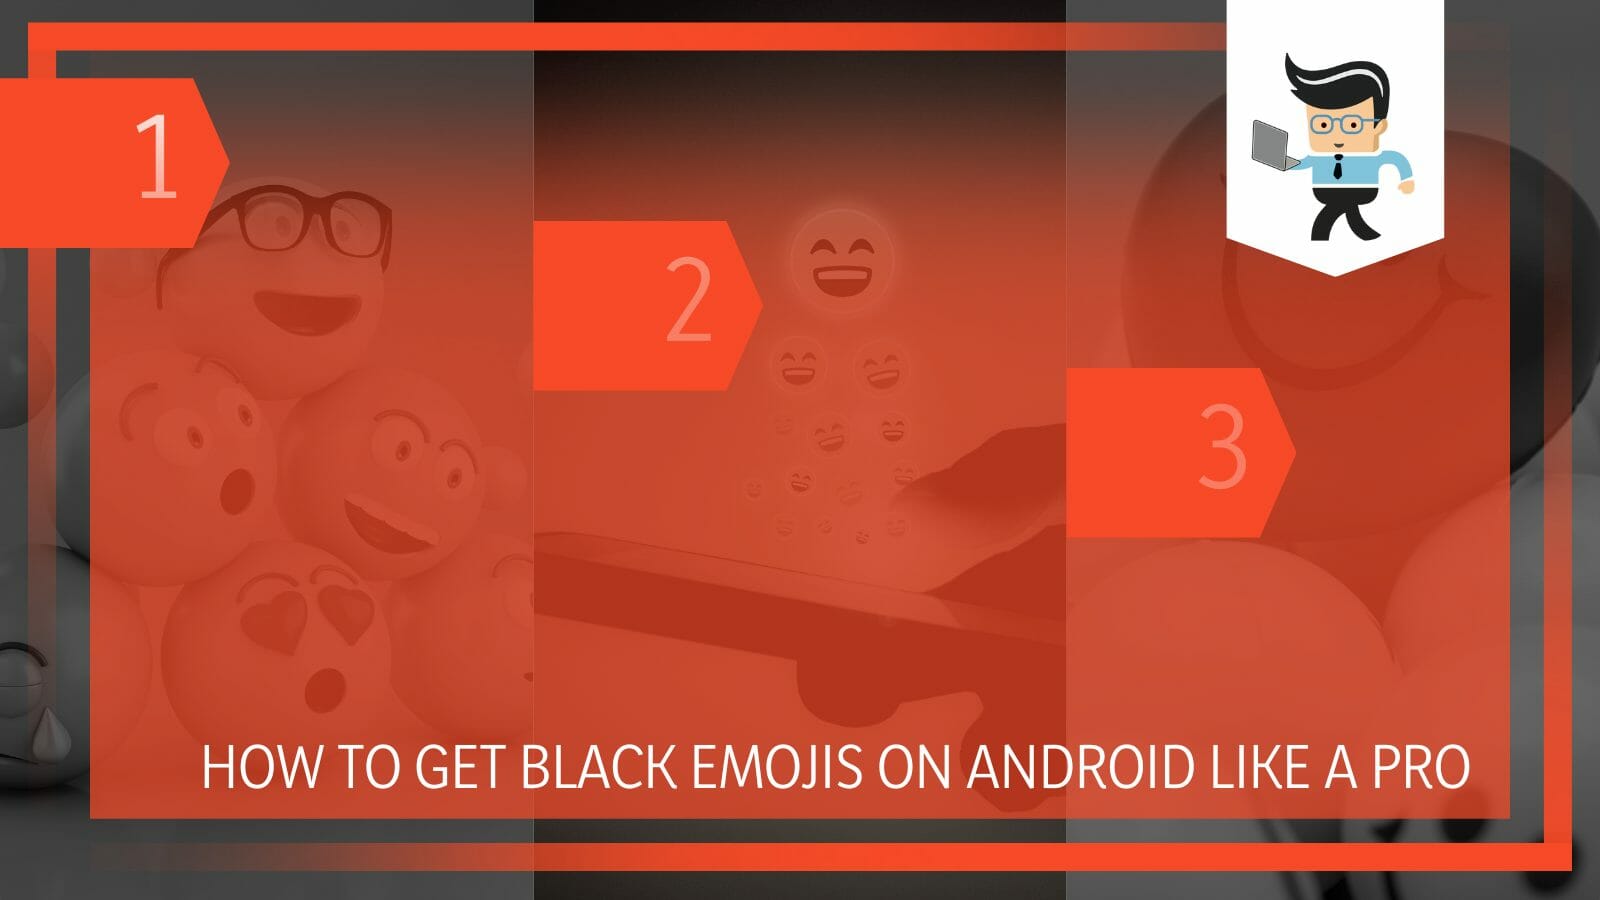 Get Black Emojis on Android Like a Pro